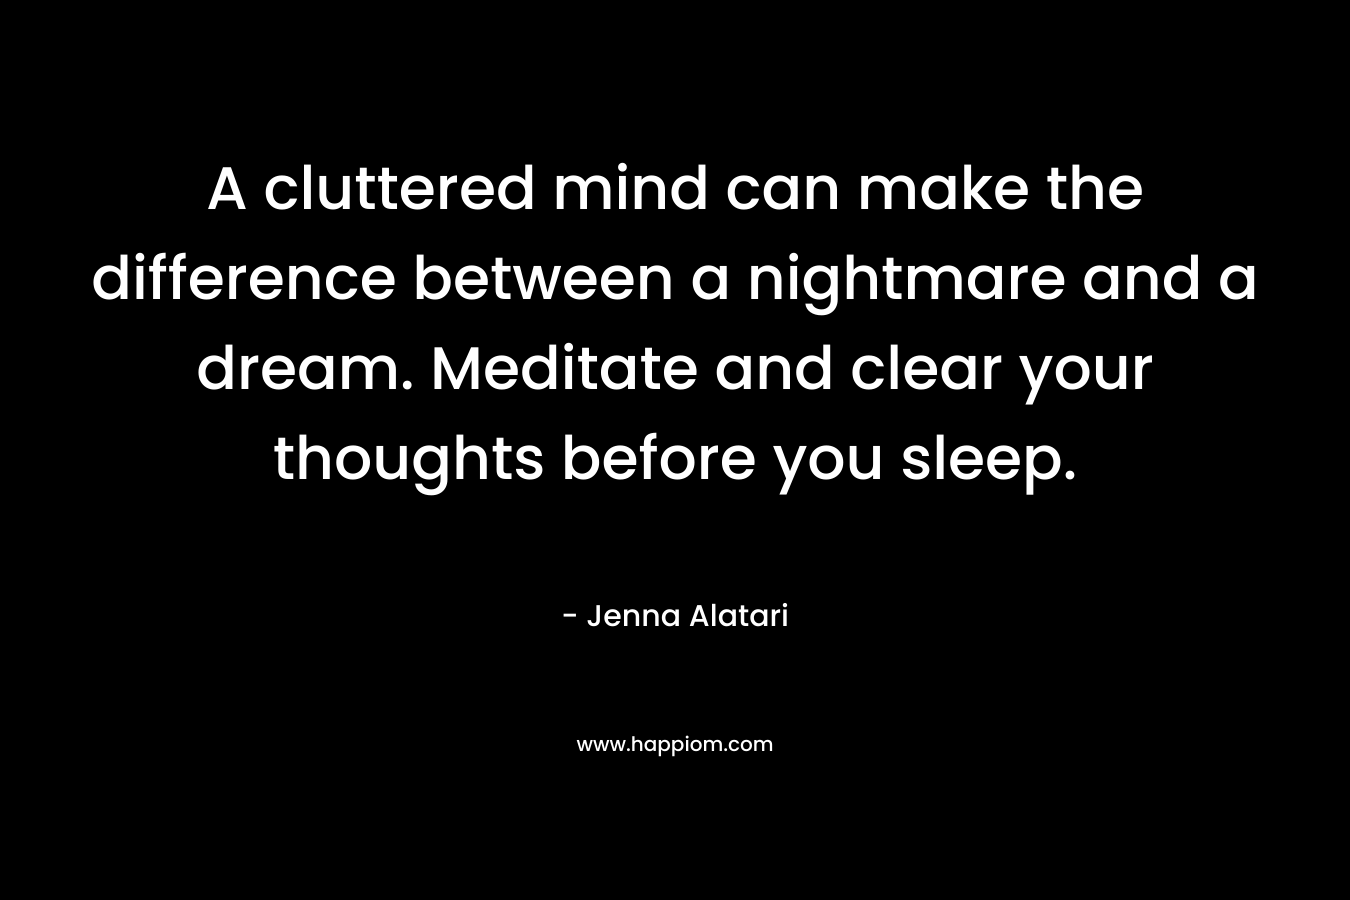 A cluttered mind can make the difference between a nightmare and a dream. Meditate and clear your thoughts before you sleep.